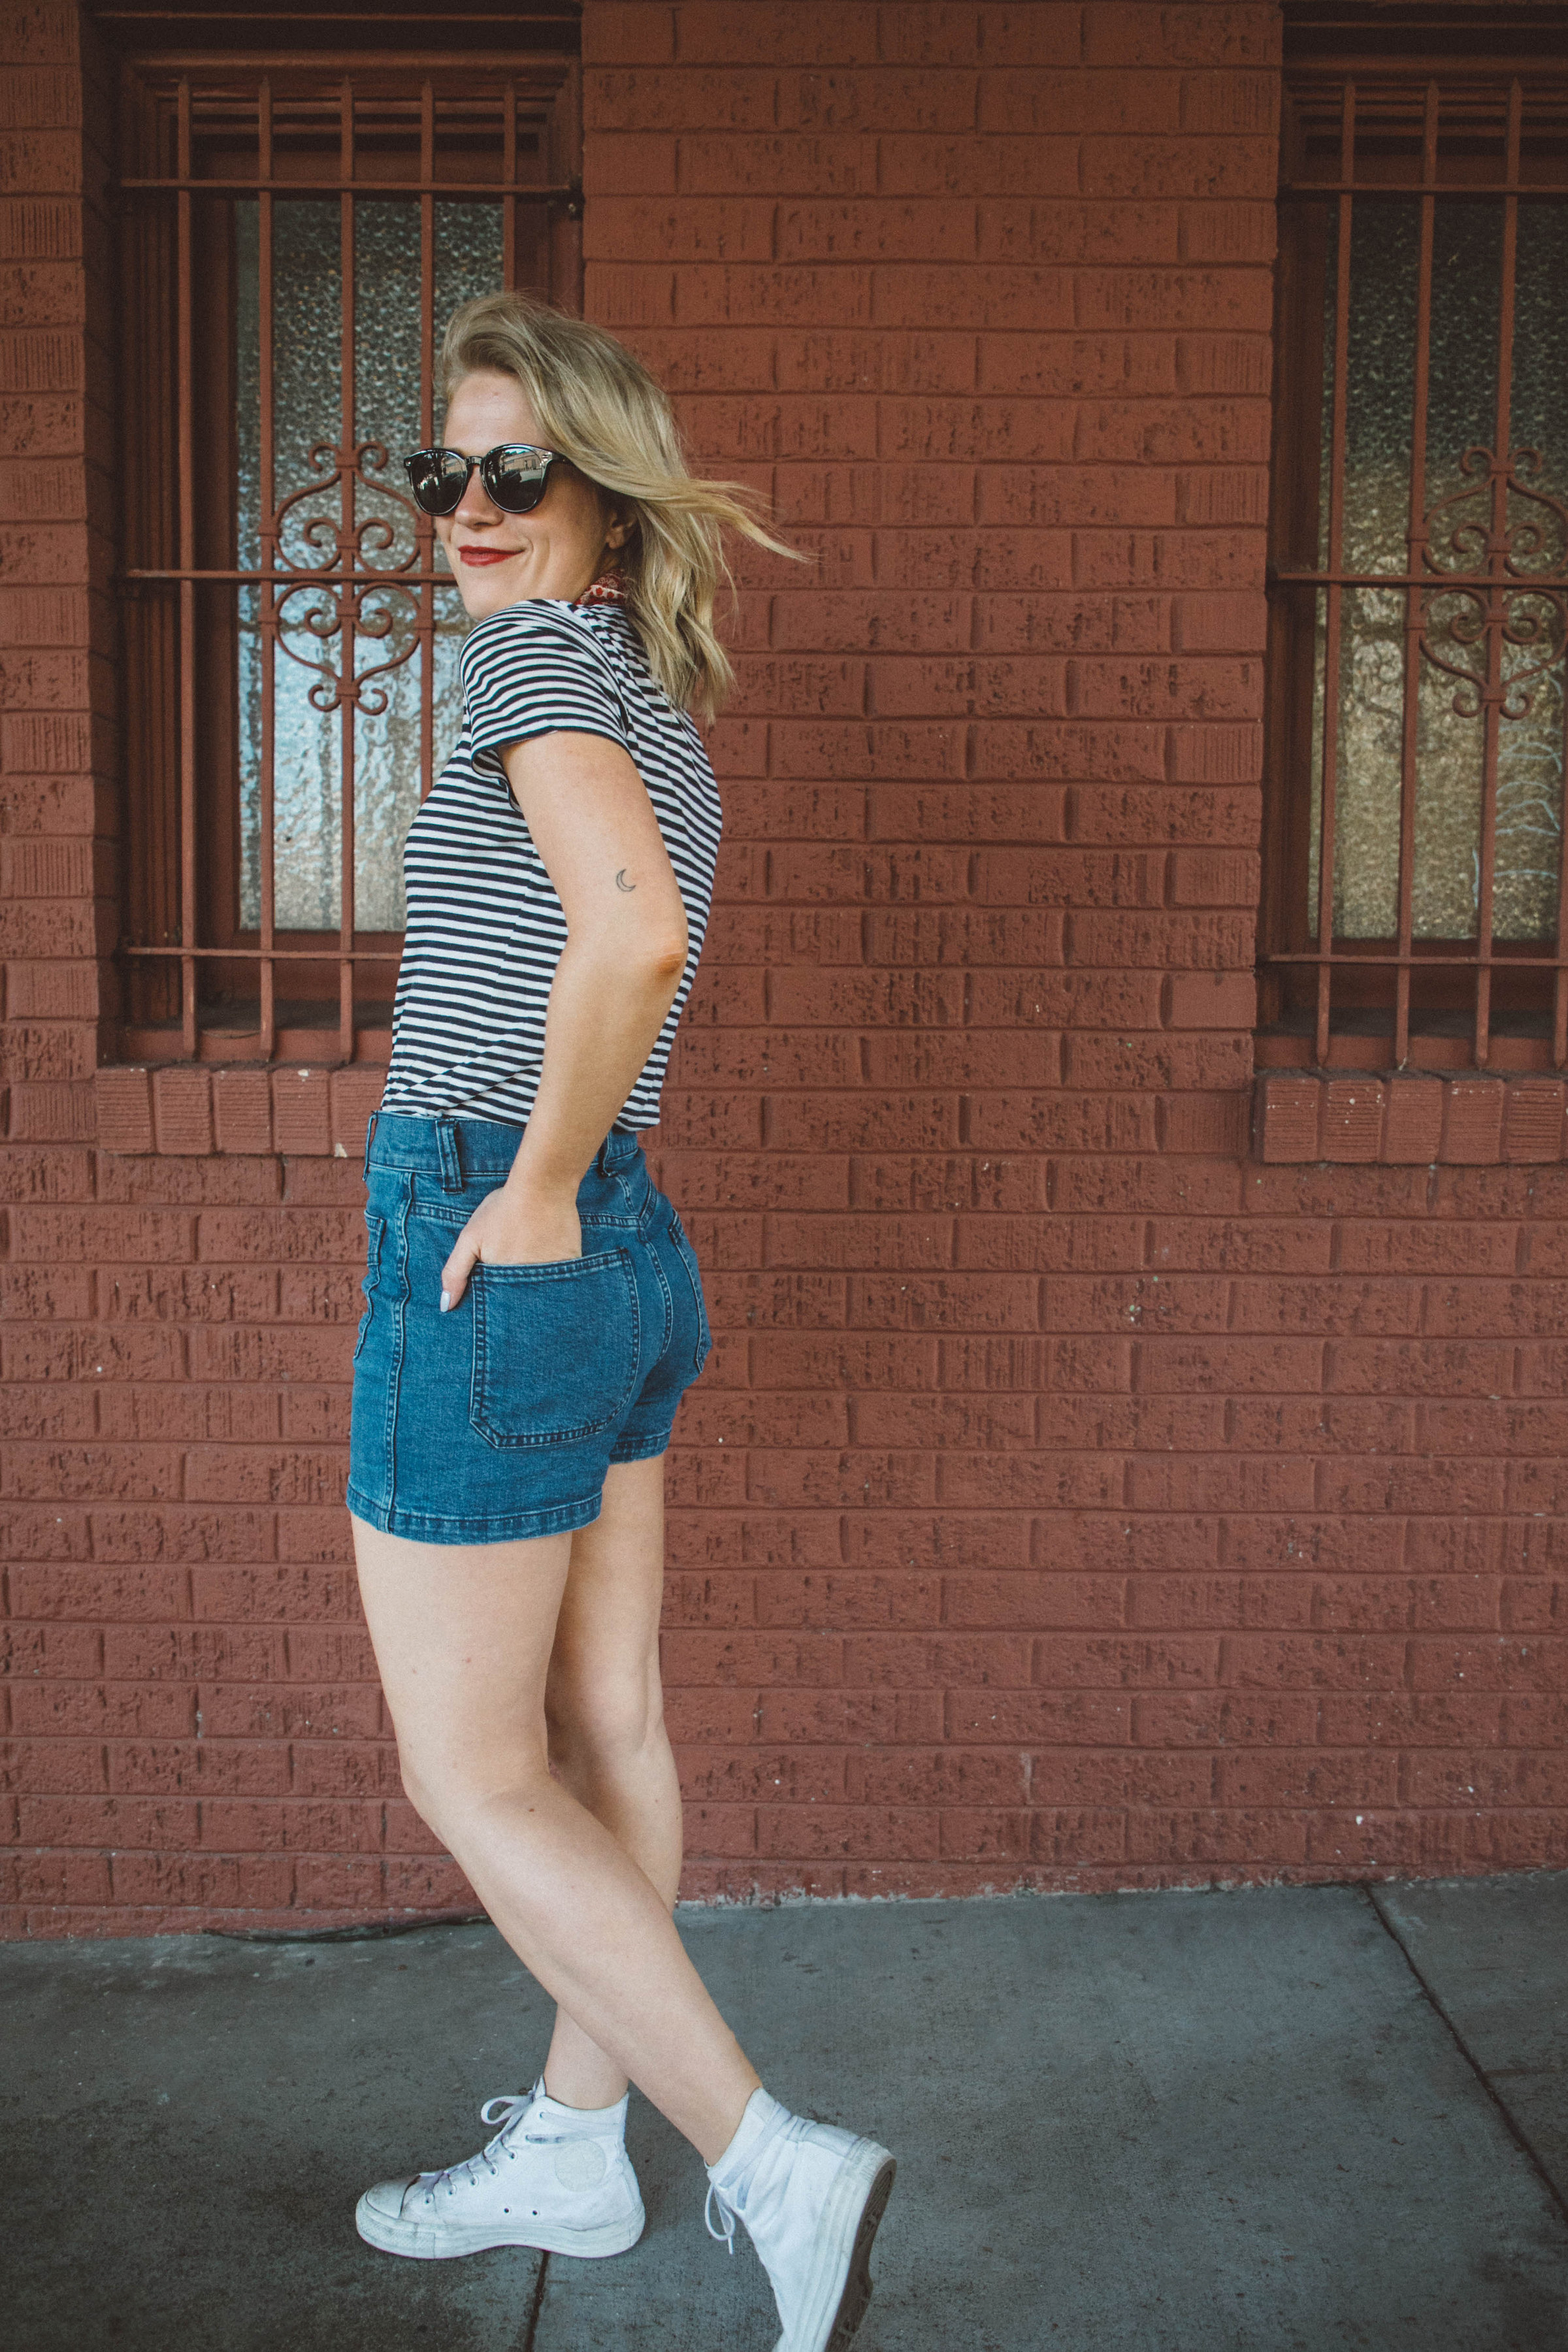 Happy 4th of July! // Celebrating in Everlane Stripes, Madewell Denim Shorts and Converse High Top Sneakers.